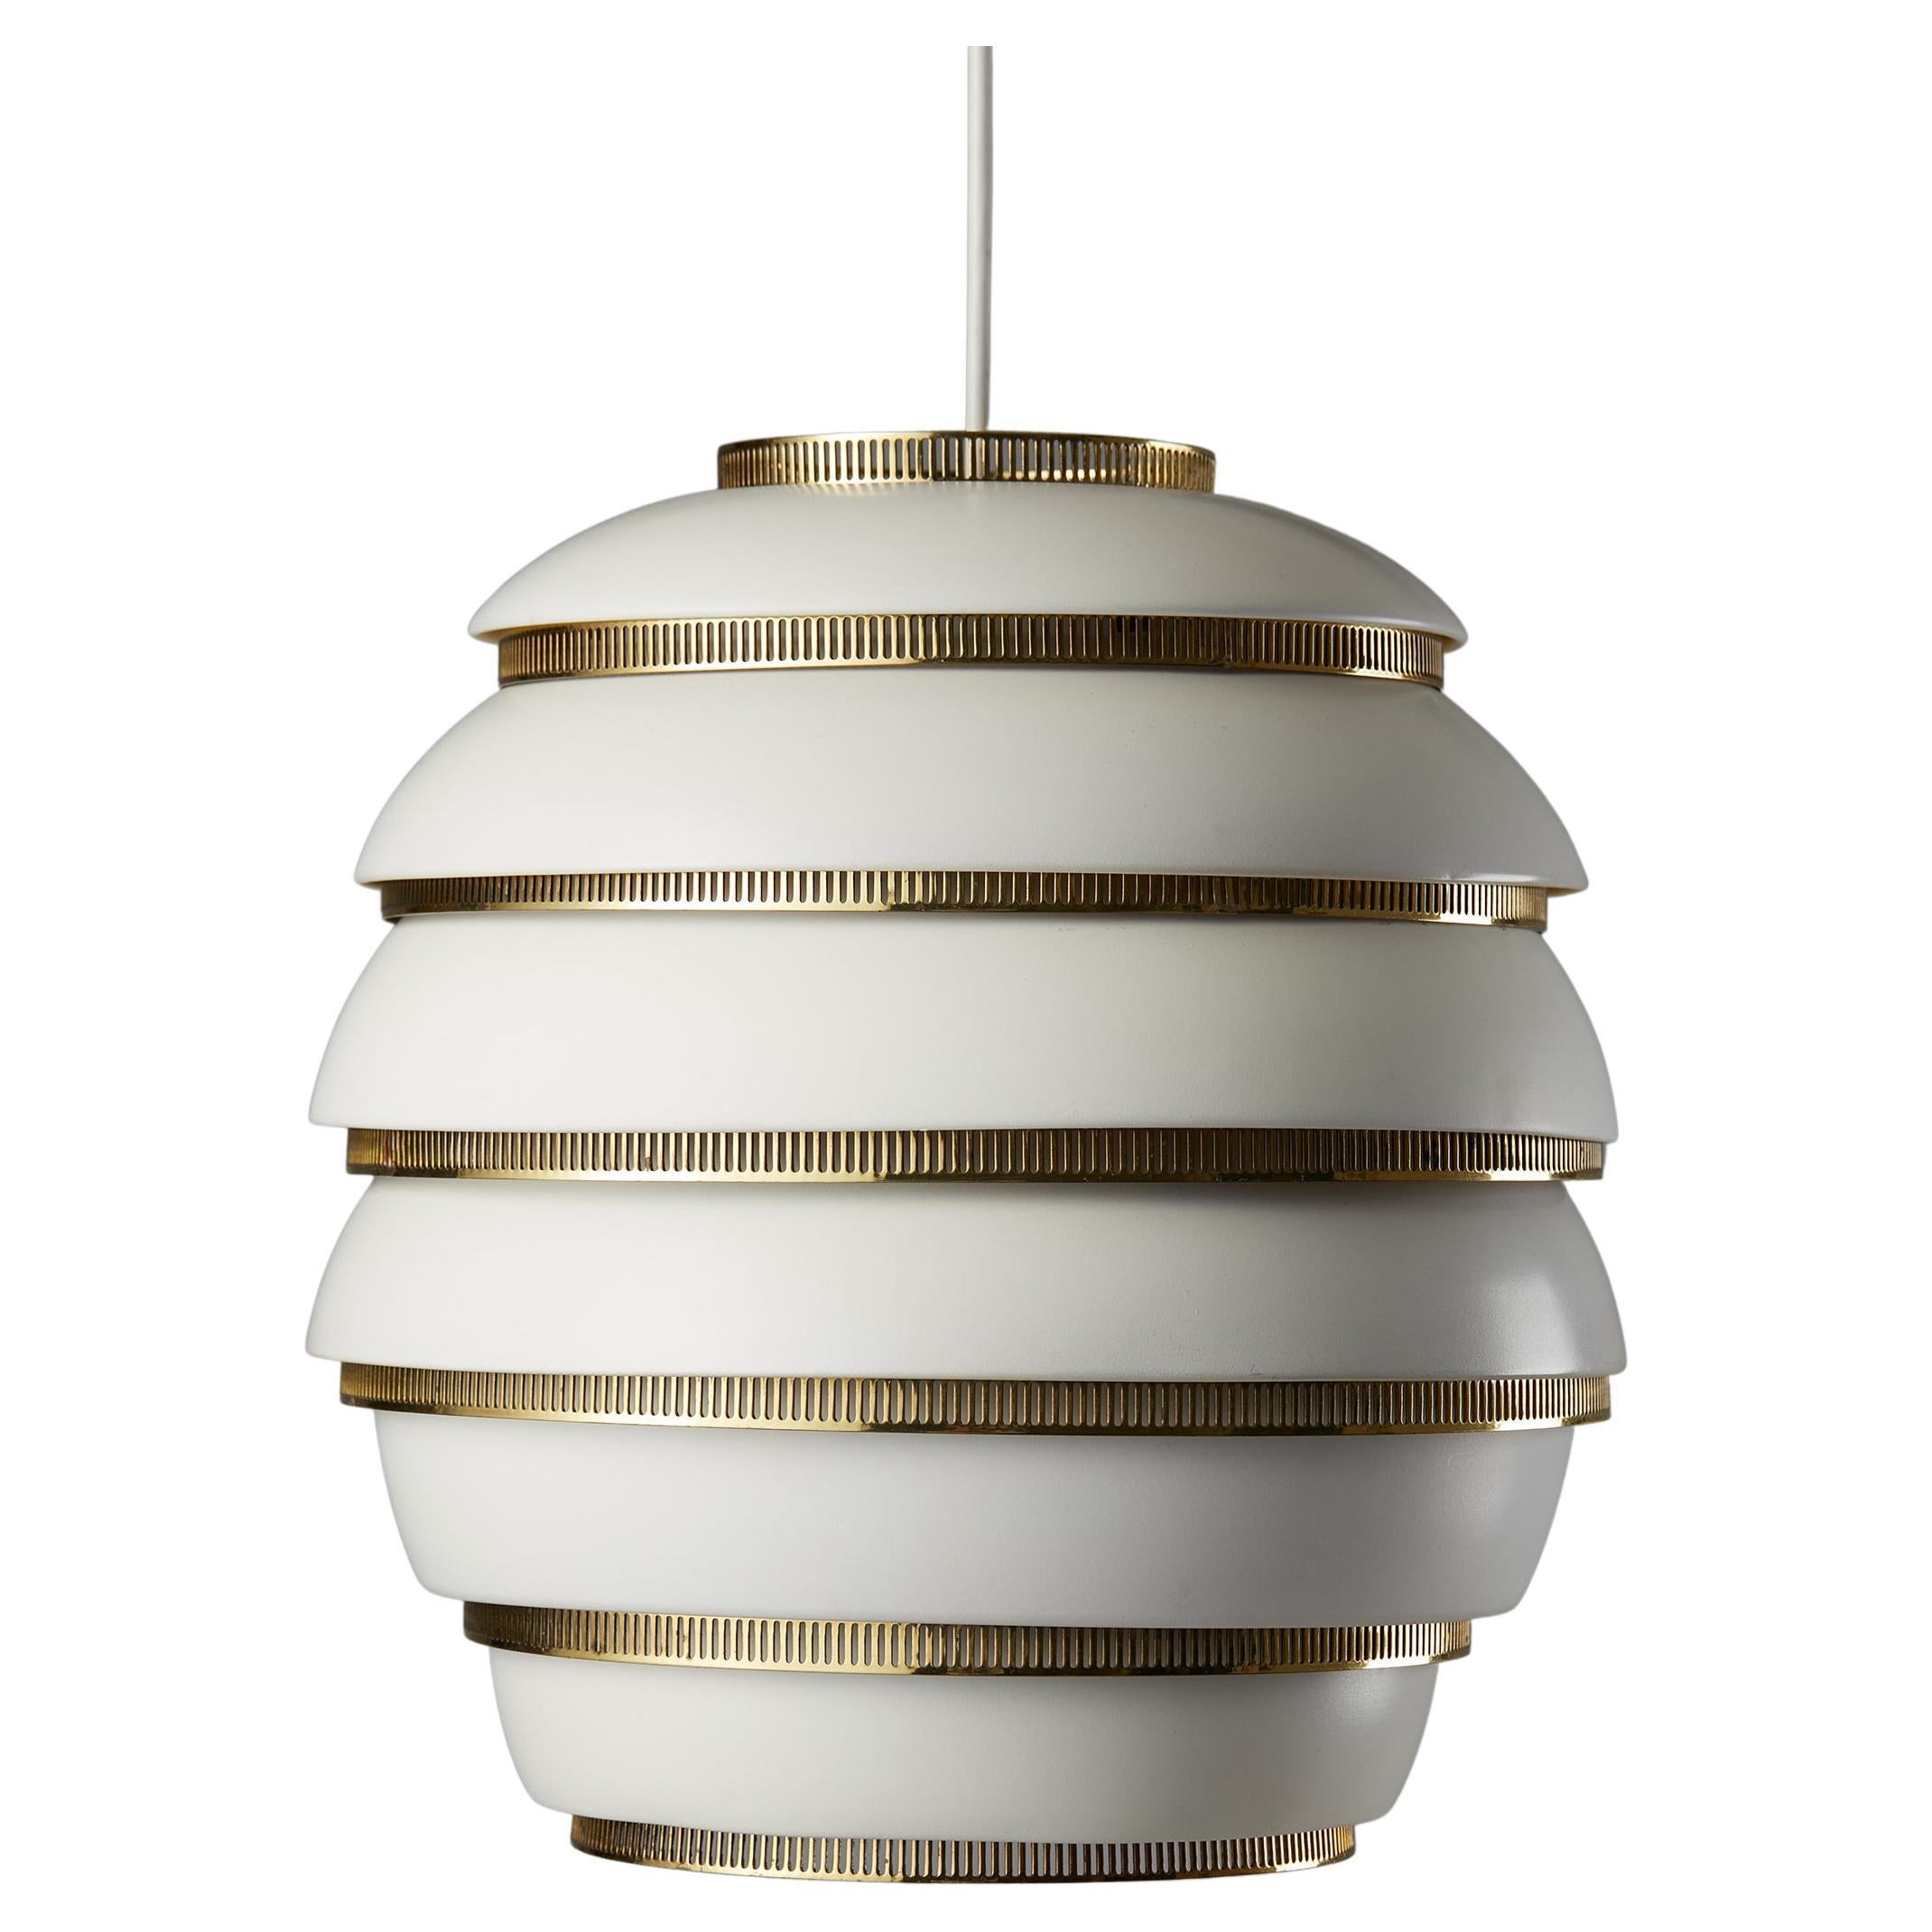 Ceiling Lamp ‘Beehive’ Model A332 Designed by Alvar Aalto for Valaistustyo For Sale